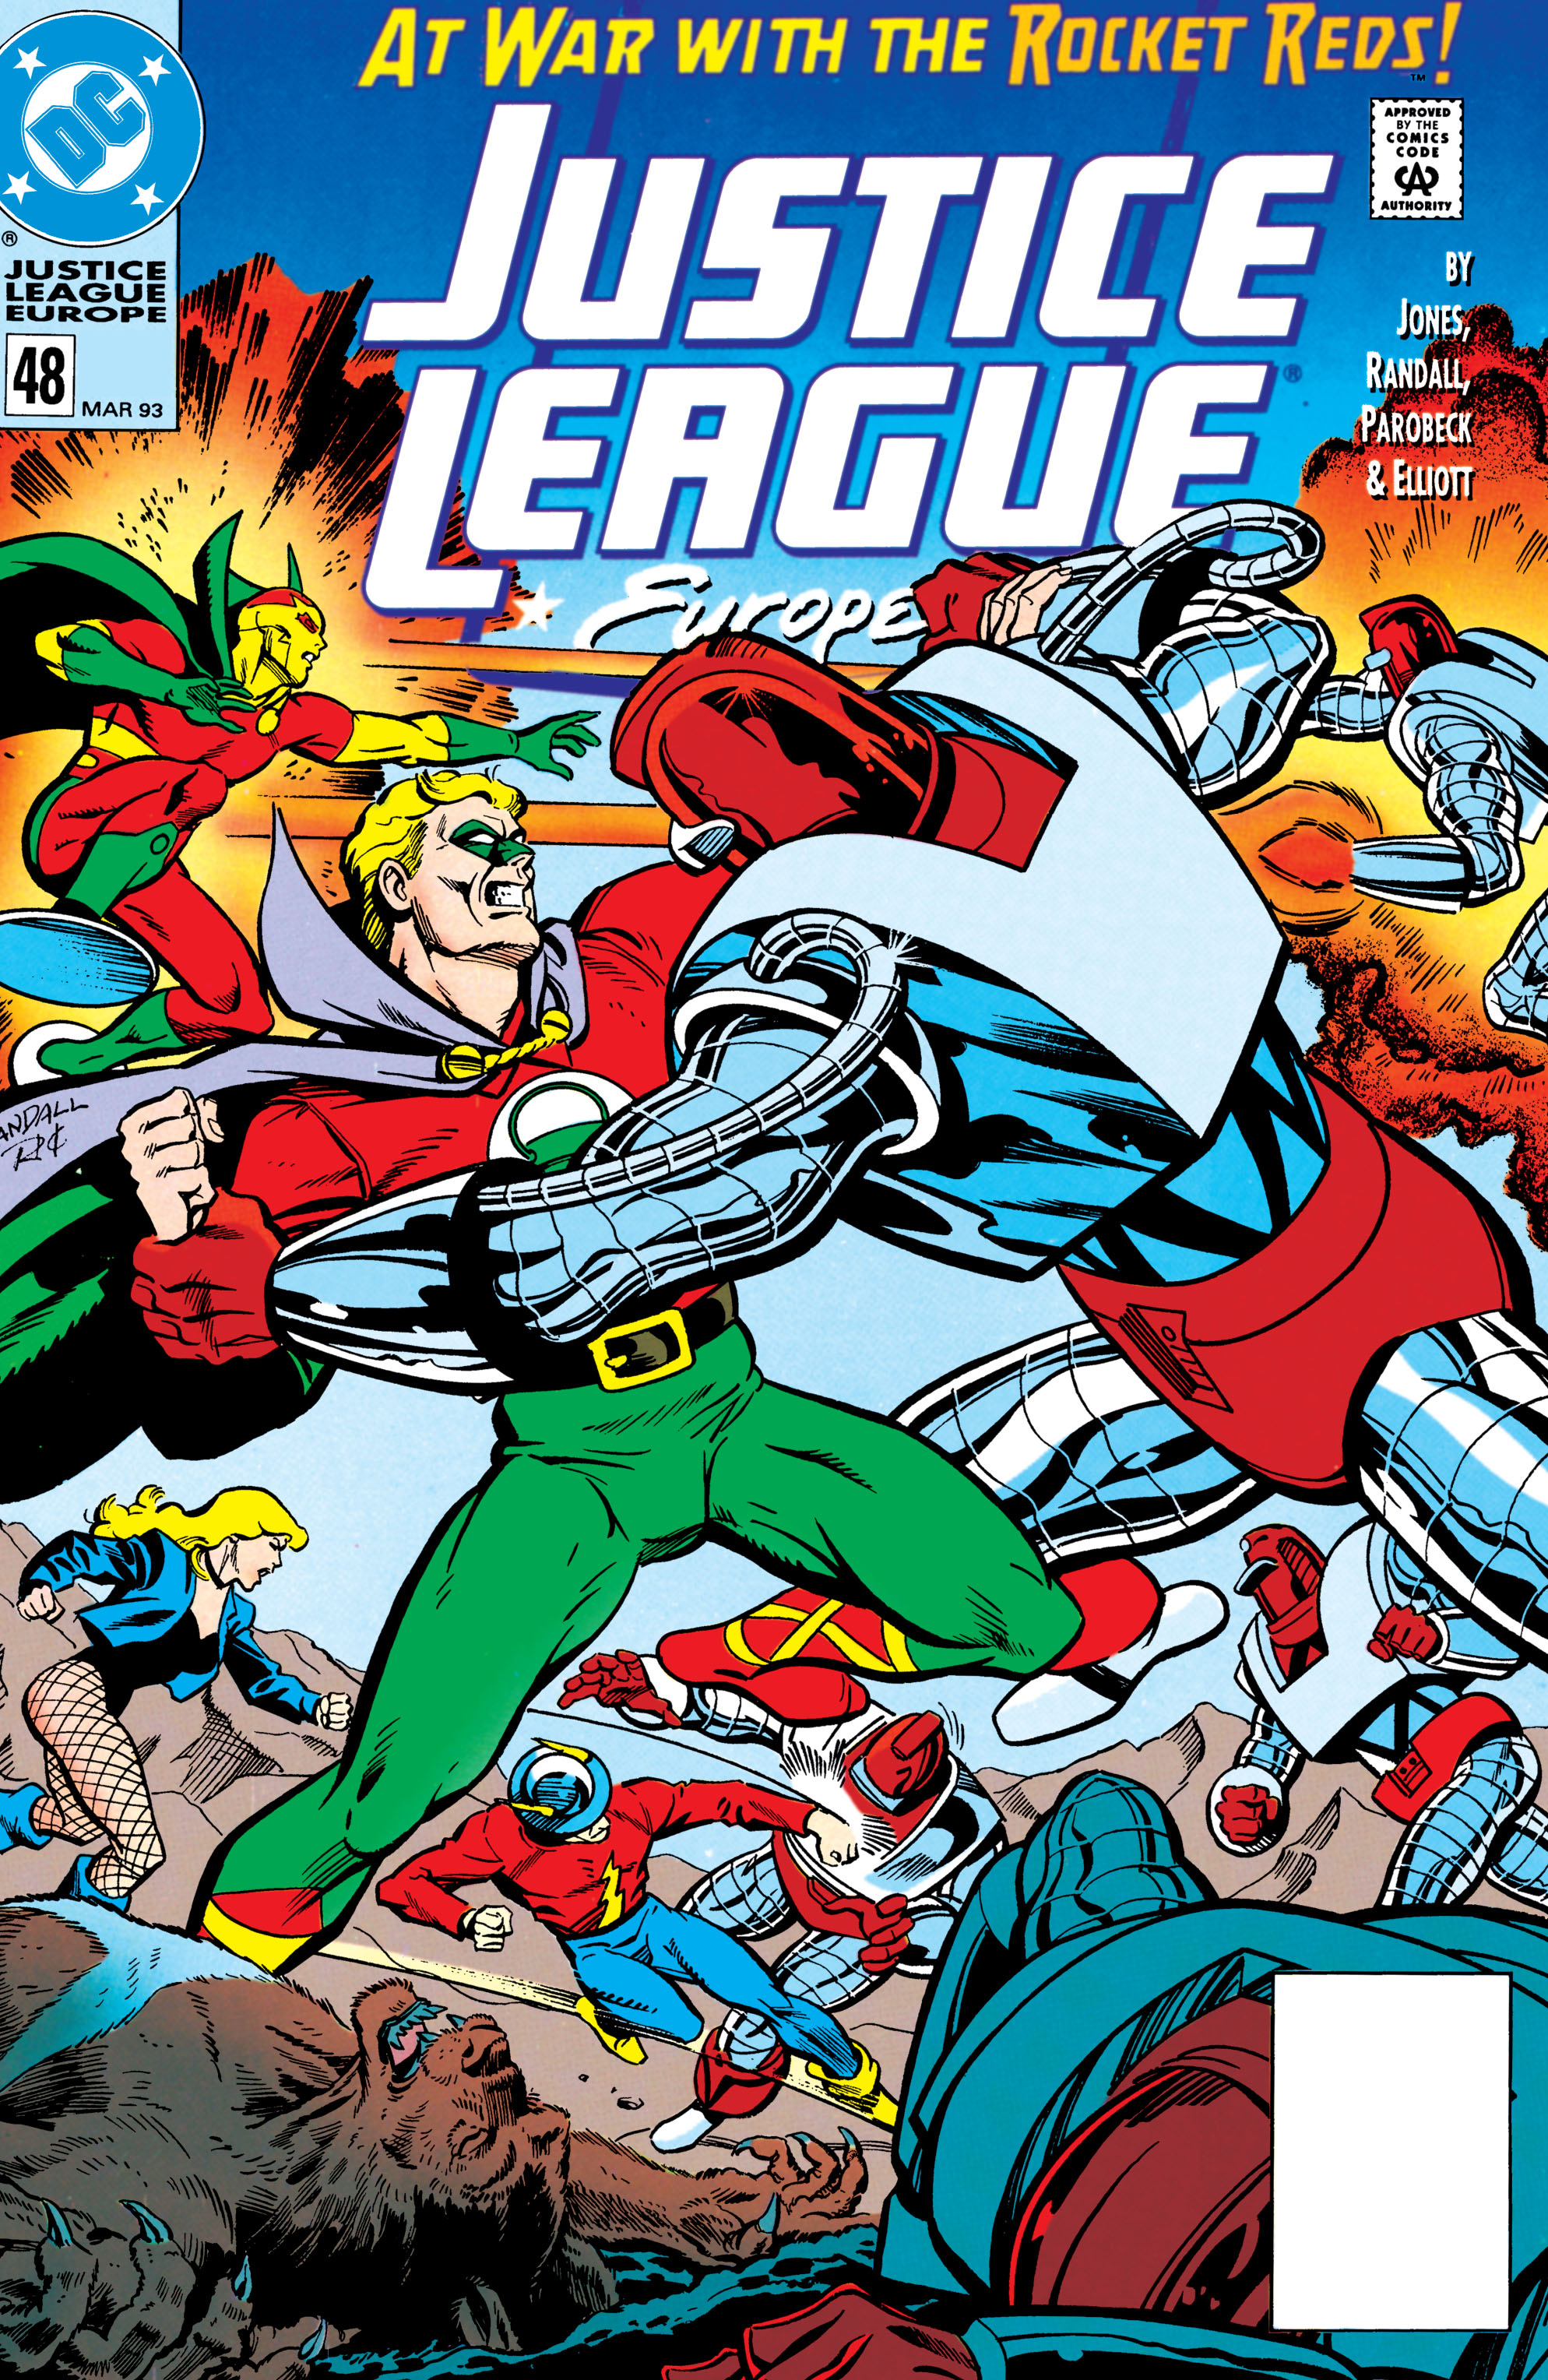 Read online Justice League Europe comic -  Issue #48 - 1